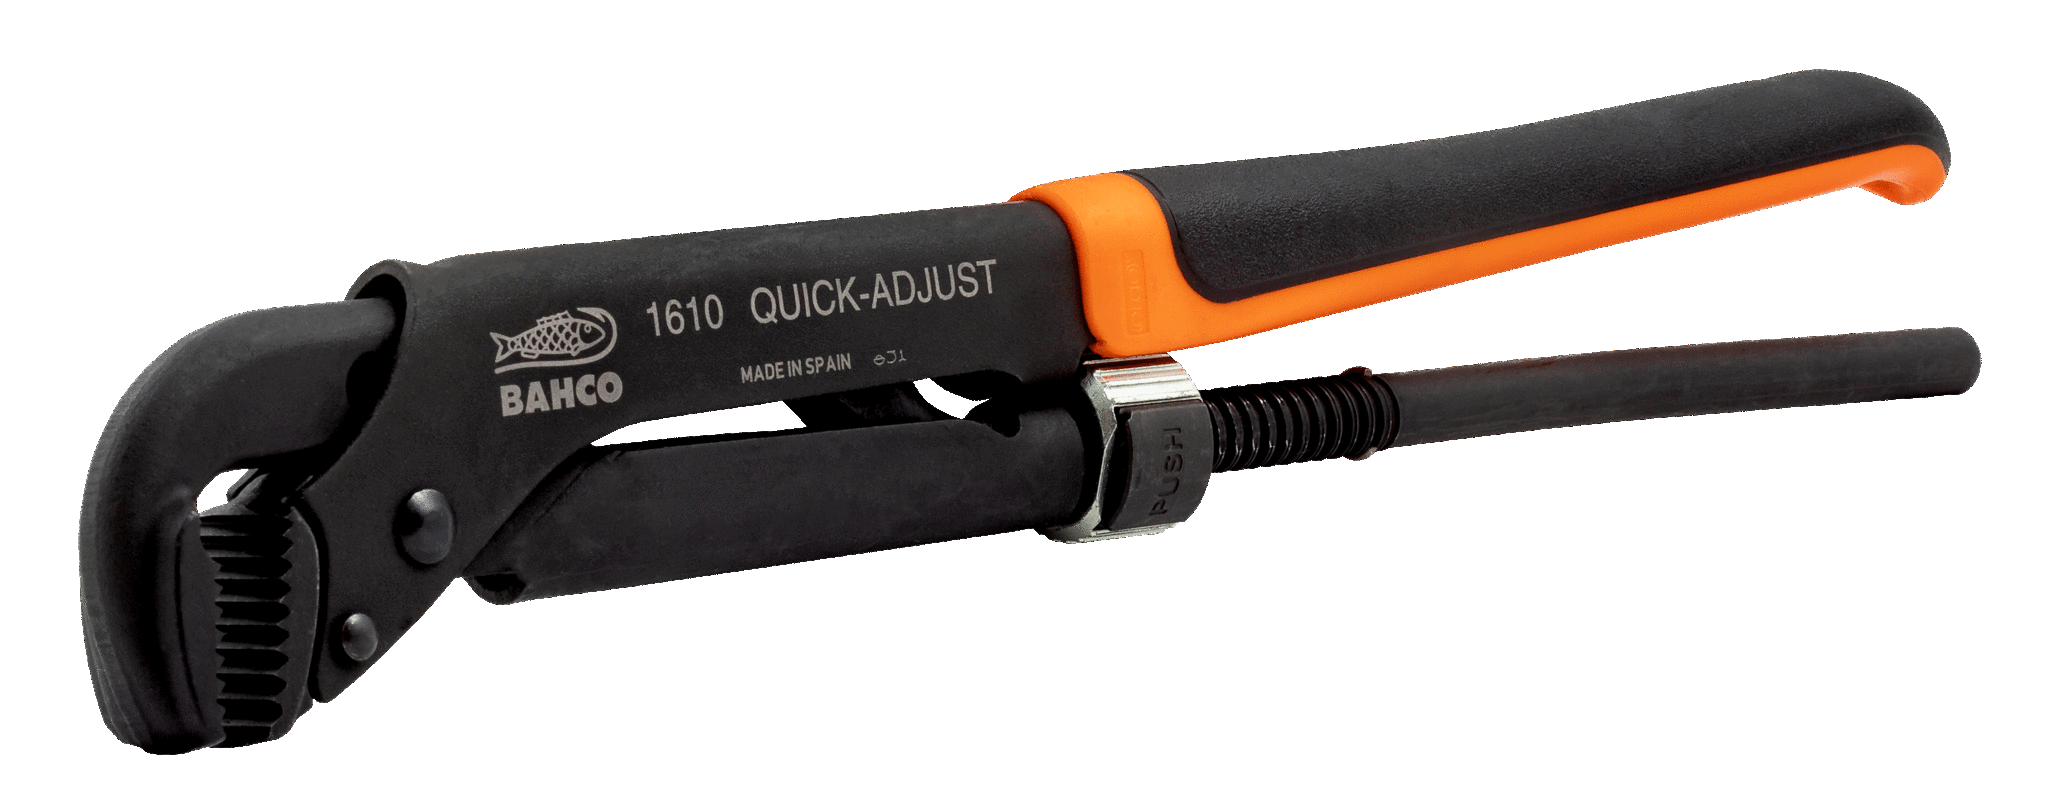 1060 mm OAL Pipe Wrench Bahco Tools 147 5 in Max Jaw Capacity Steel Material End Style Head Angle Standard Adjustment Type